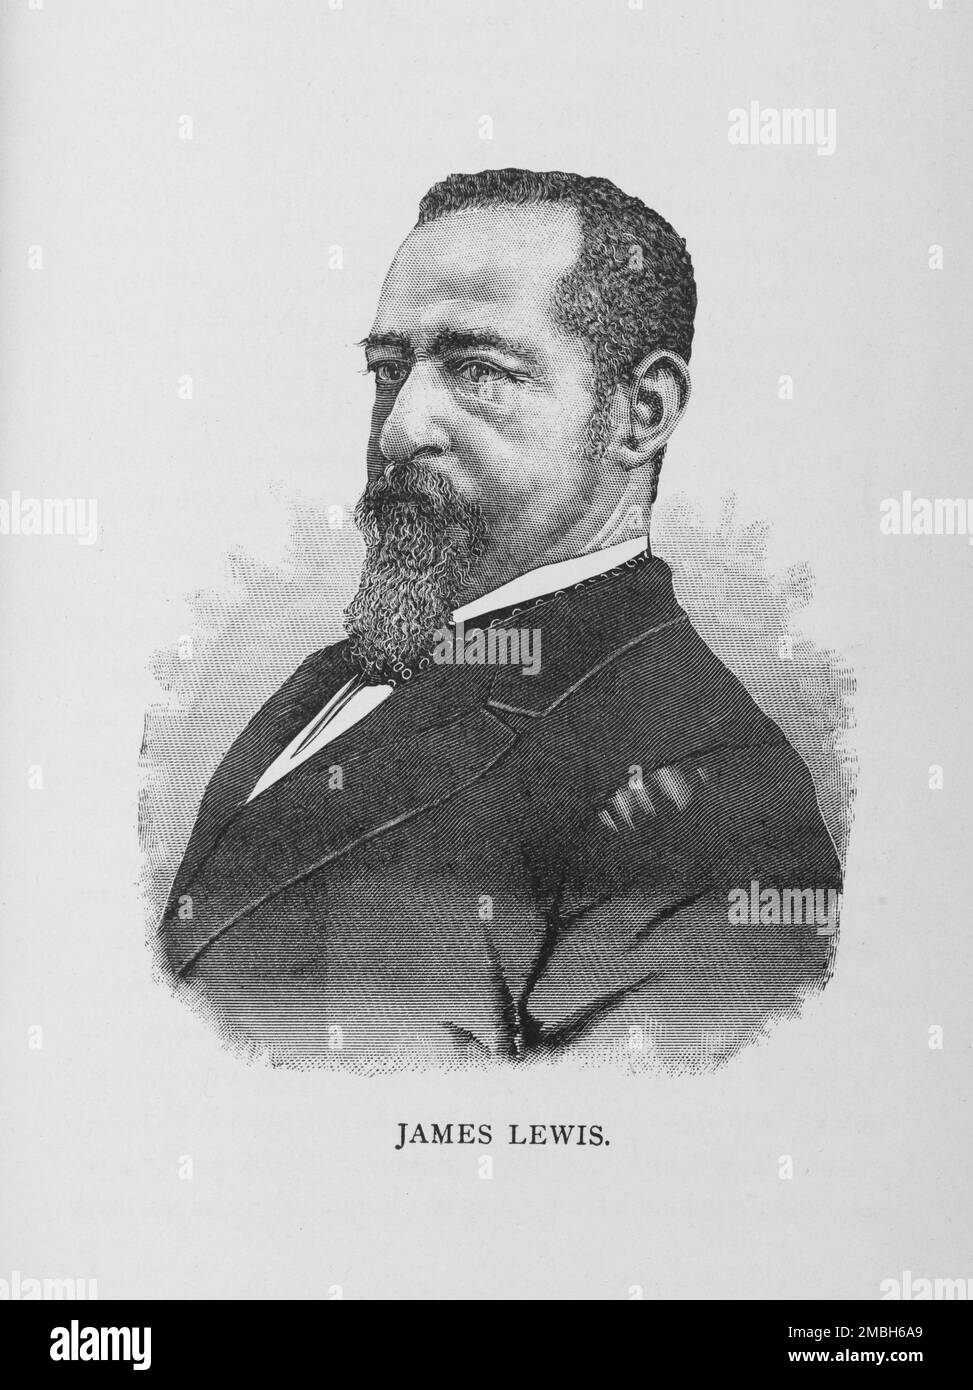 James Lewis, 1887. African-American soldier and politician, born enslaved. His father was a white planter. Lewis worked on steamboats on the Mississippi, and in New Orleans he helped organize the First Louisiana Volunteer Native Guards, becoming a captain. From &quot;Men of Mark: Eminent, Progressive and Rising&quot; by William J. Simmons. Stock Photo